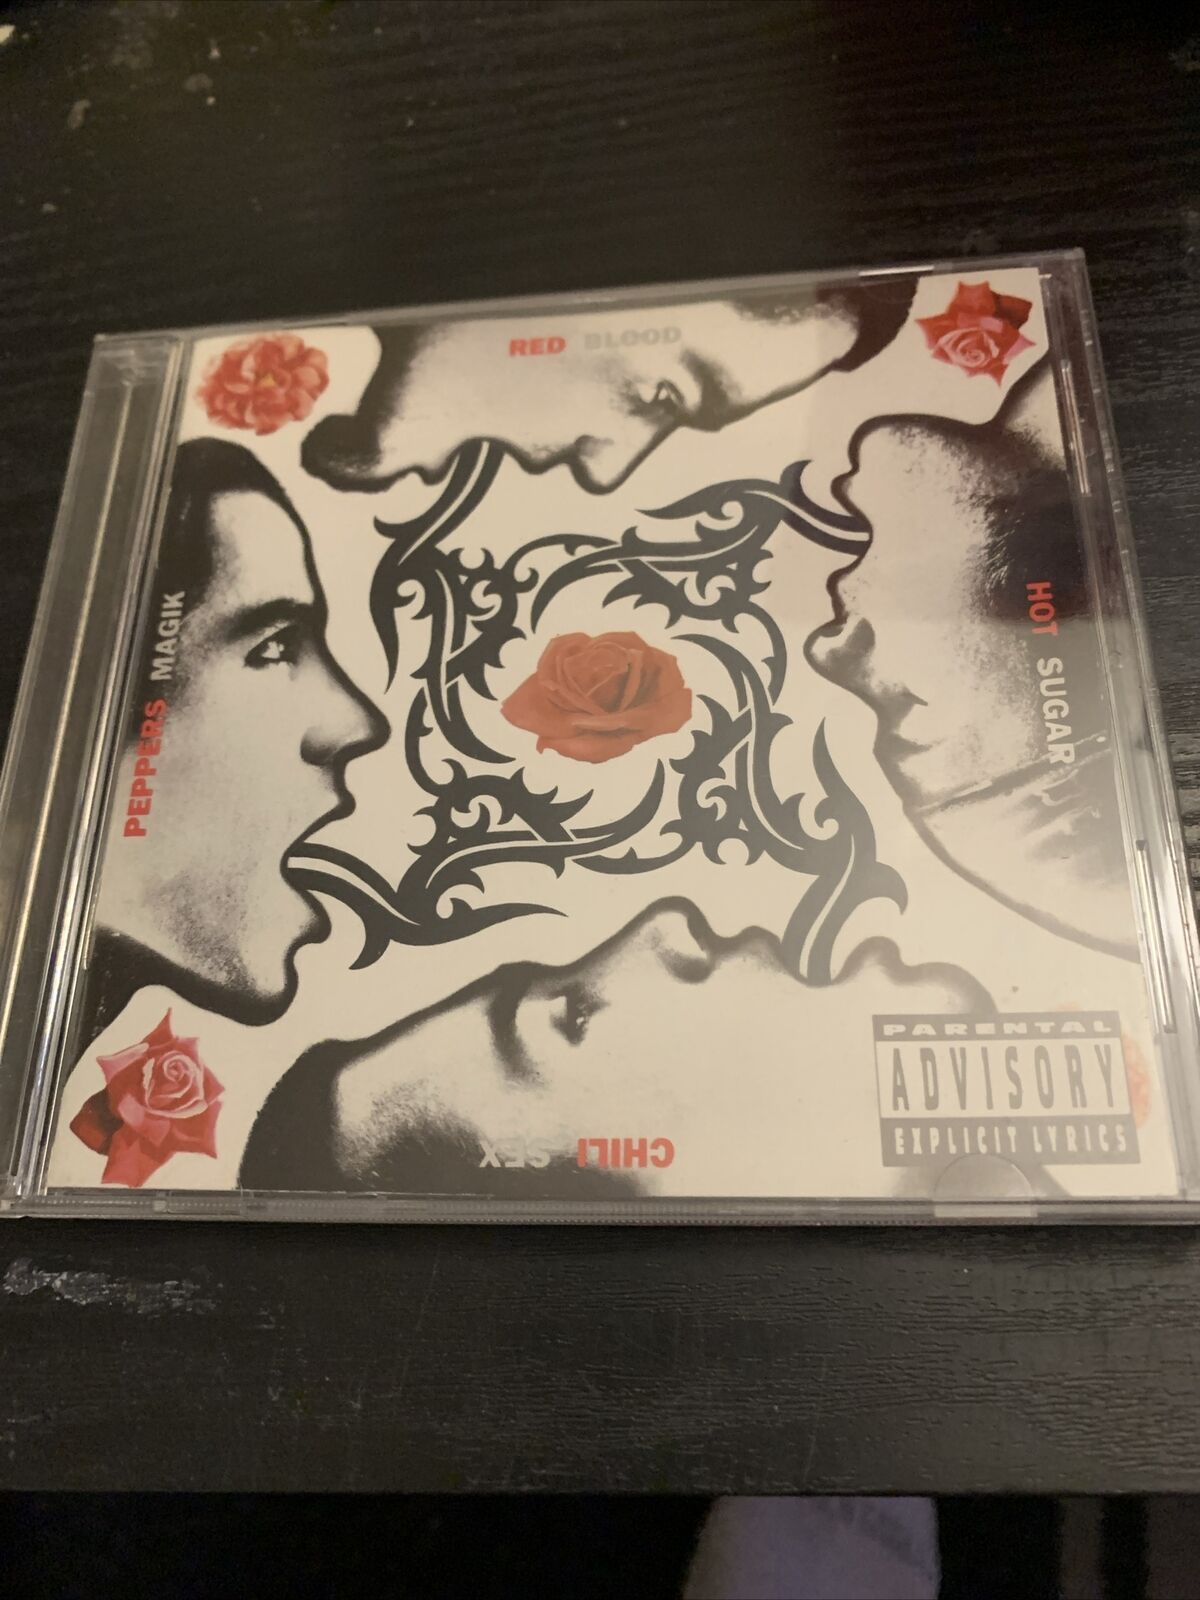 Blood Sugar Sex Magik by Red Hot Chili Peppers (CD, 1991)